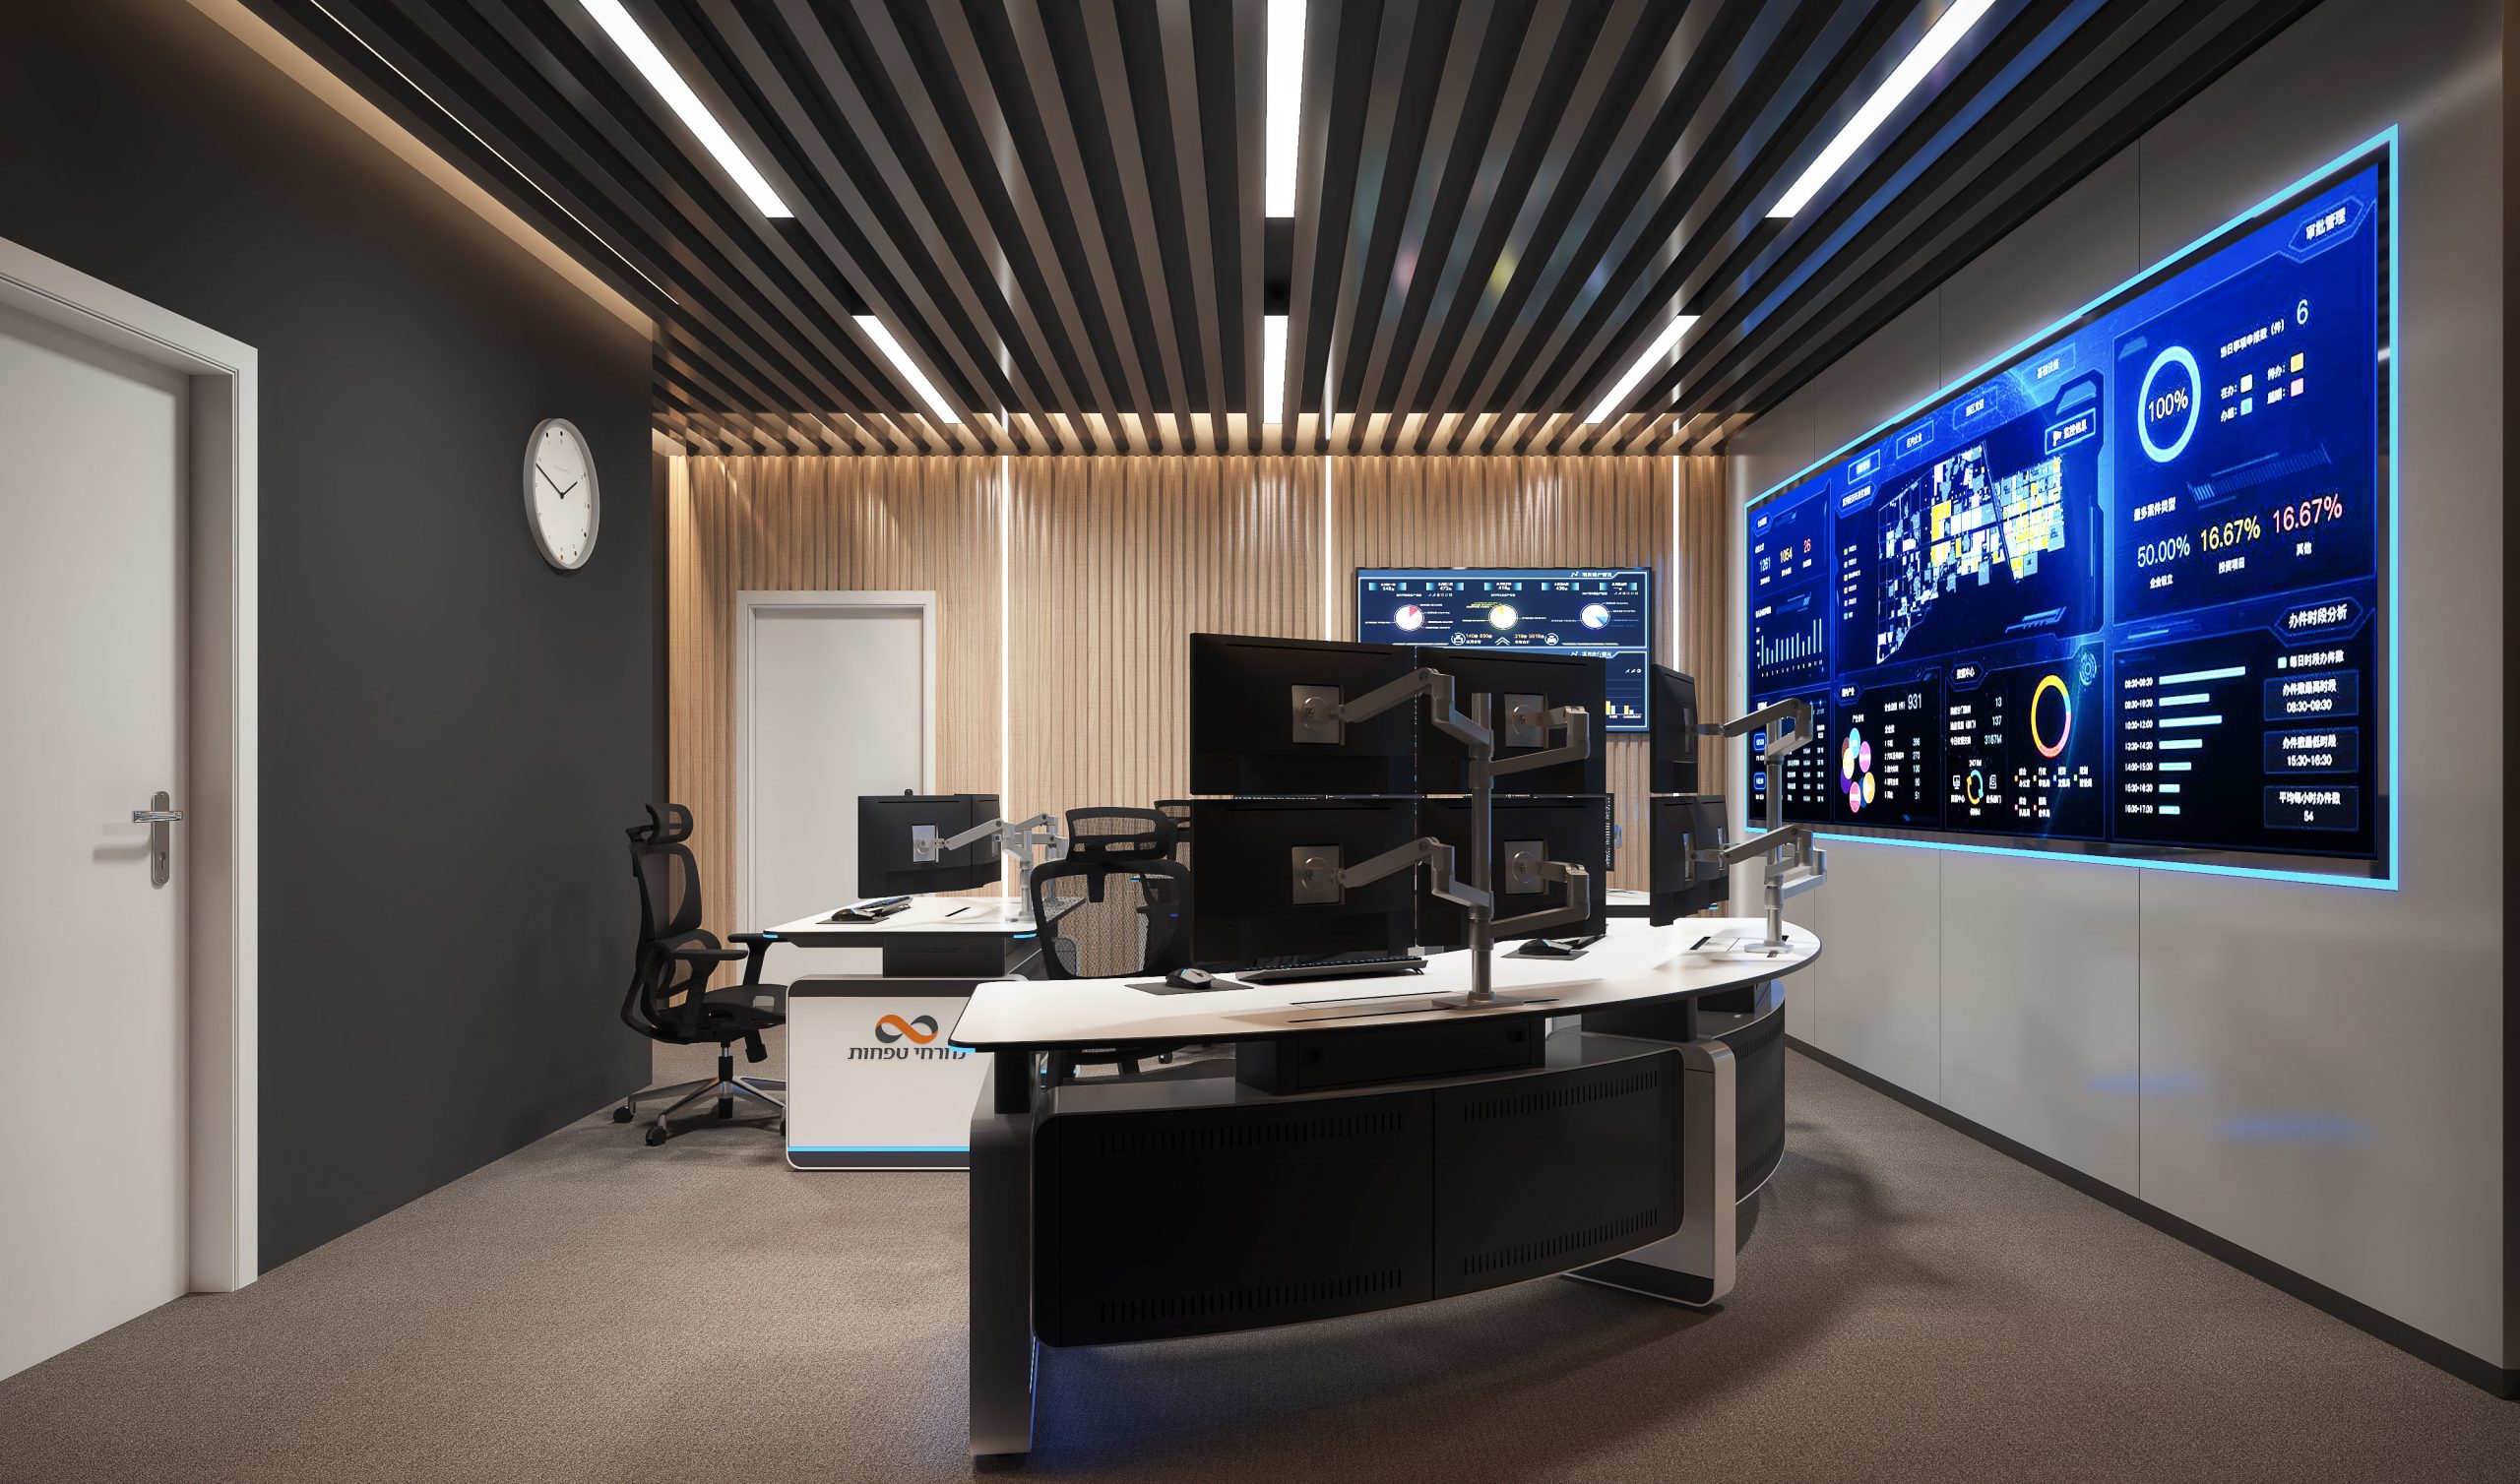 Why are control room architects seeking modular ergonomic consoles to furnish their command centers?